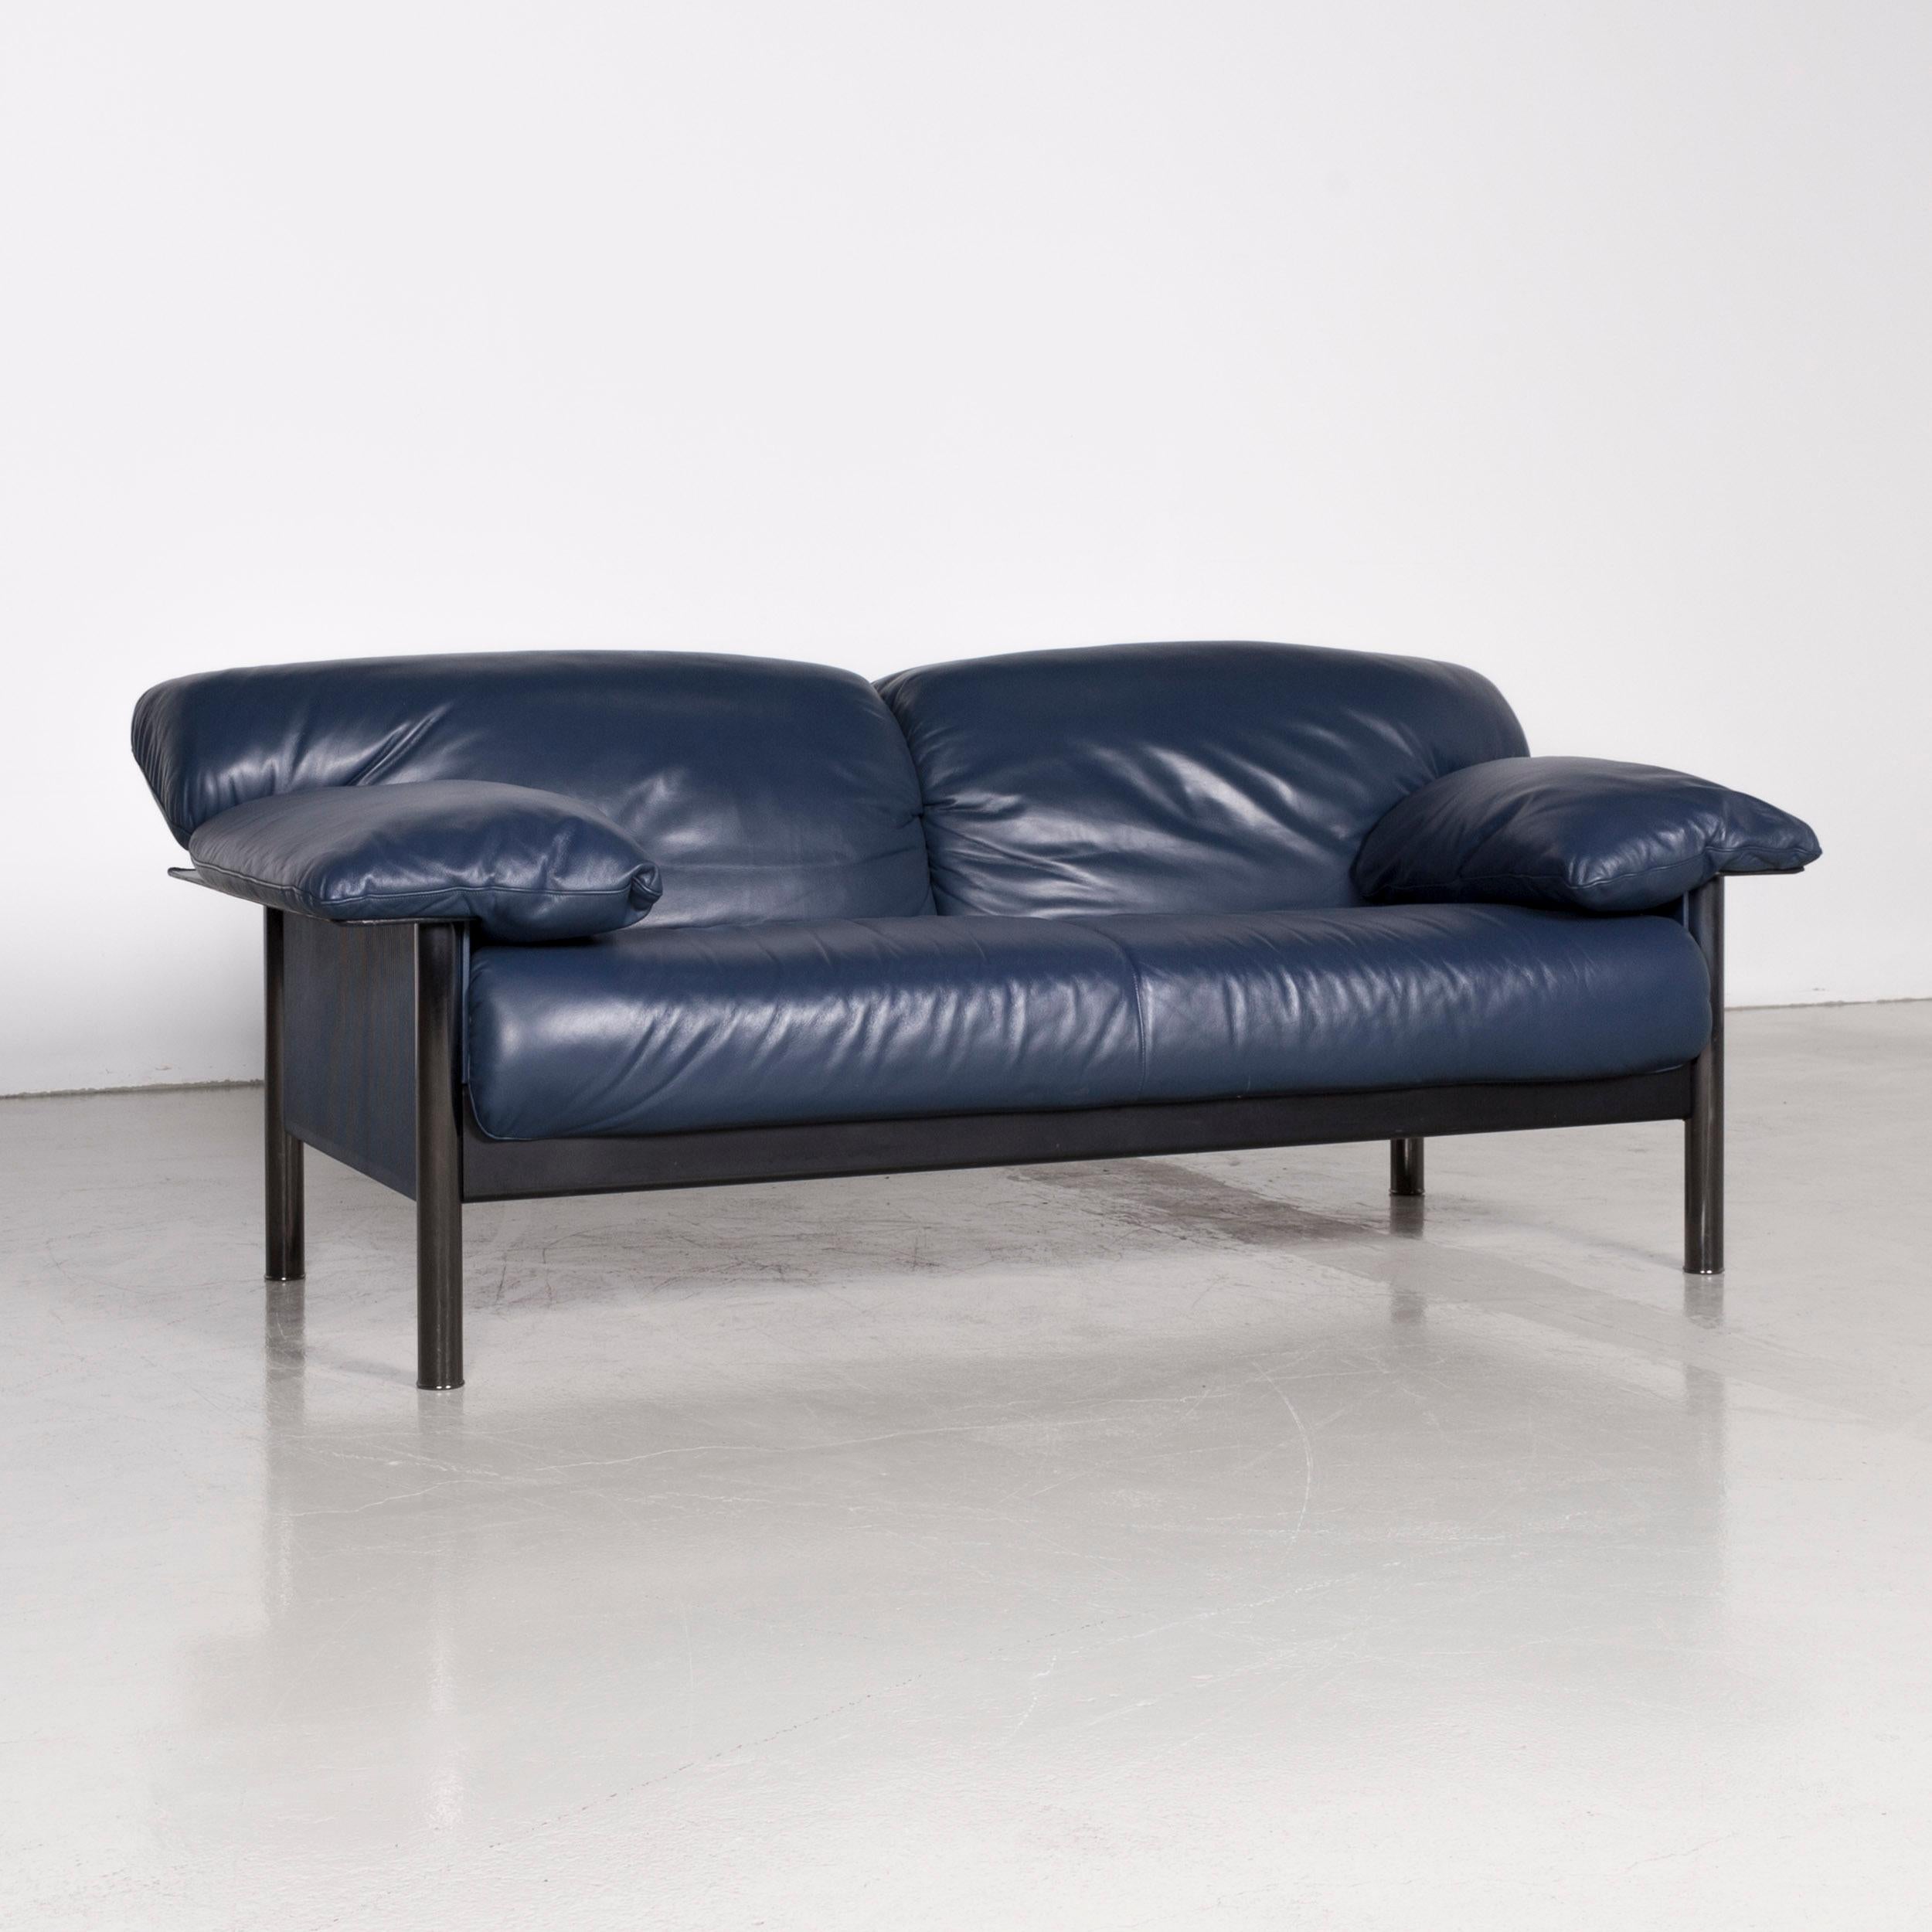 Modern Poltrona Frau Designer Leather Sofa Blue Genuine Leather Two-Seat Couch